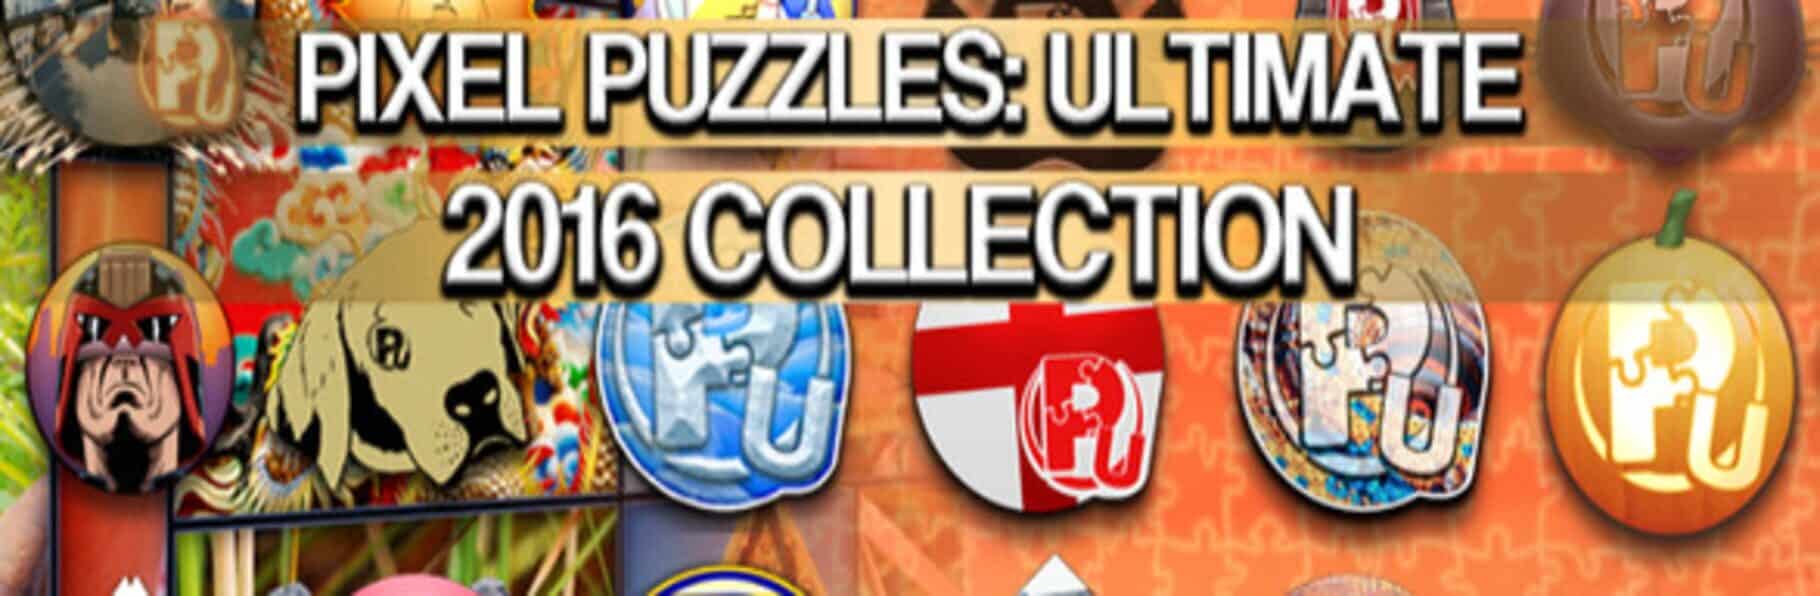 Pixel Puzzles Ultimate: 2016 Jigsaw Collection